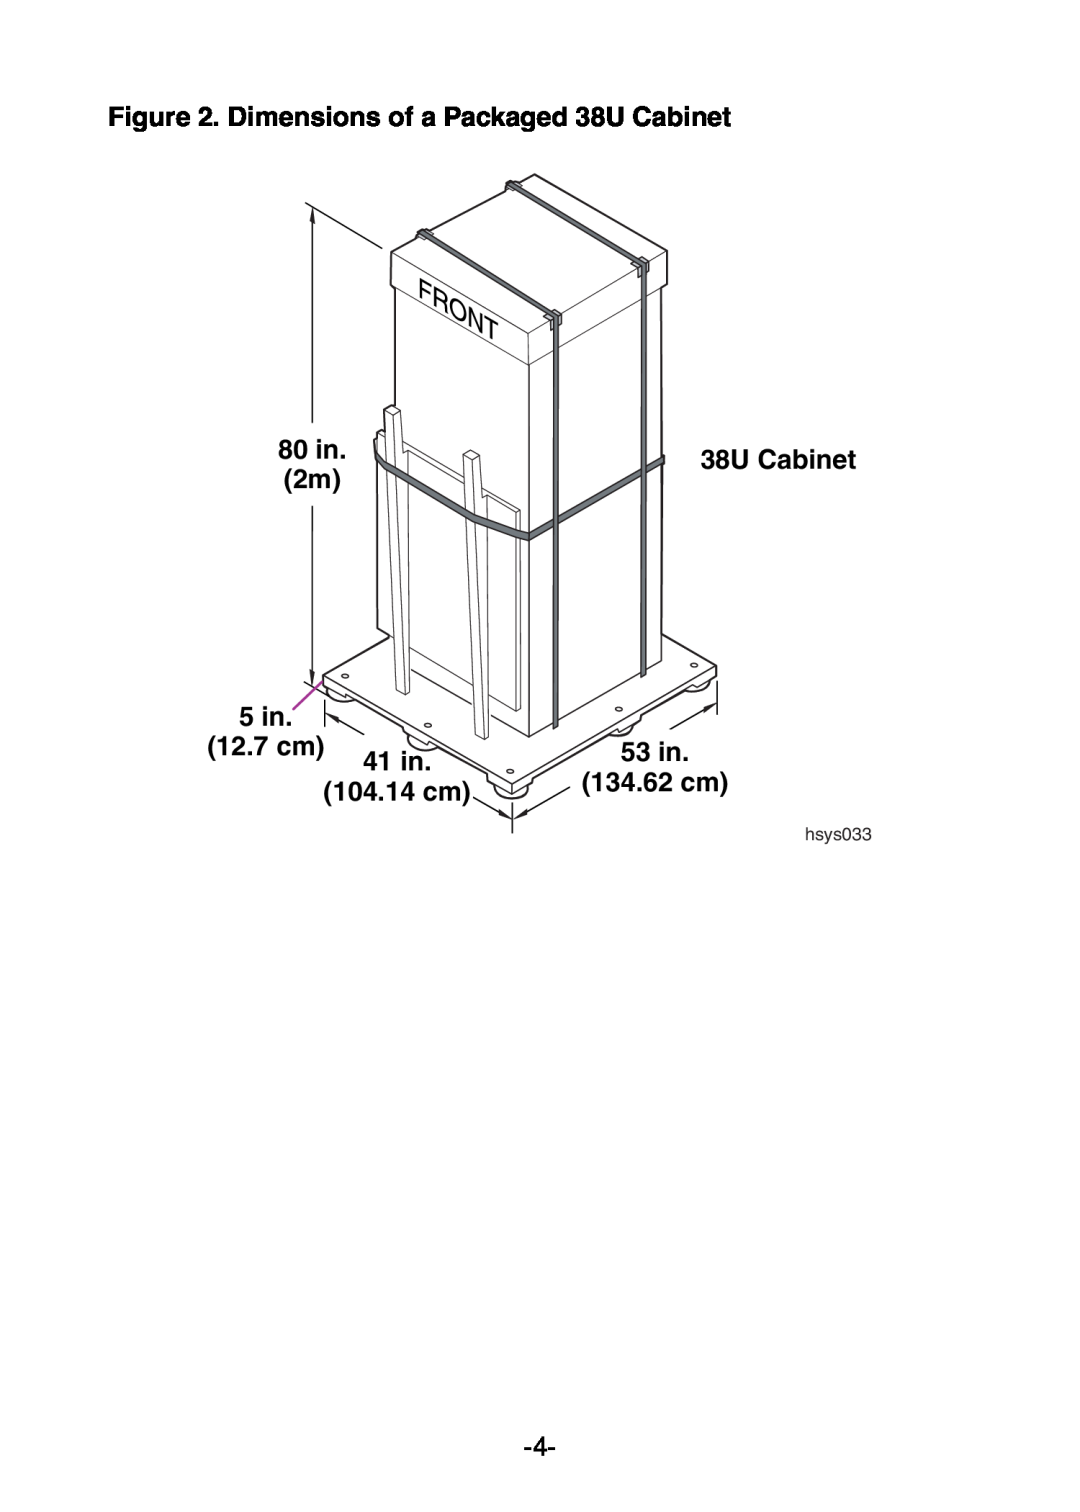 NEC 5800/320Fd Dimensions of a Packaged 38U Cabinet, 80 in, 5 in, 41 in, 53 in, 104.14 cm, 12.7 cm, 134.62 cm, hsys033 